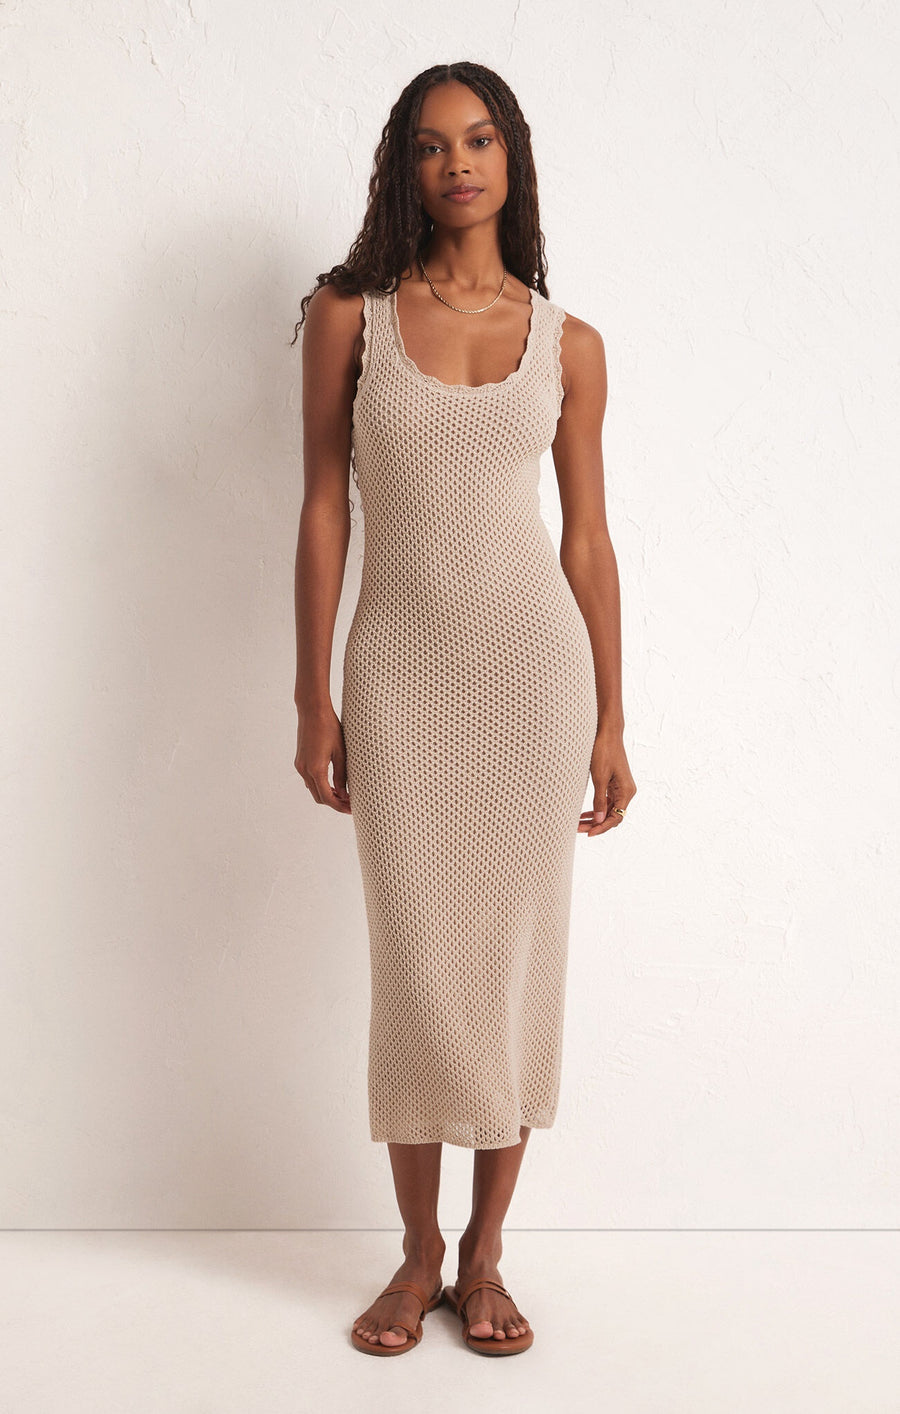 Featuring a sleeveless knitted scoopneck midi dress in the color natural 